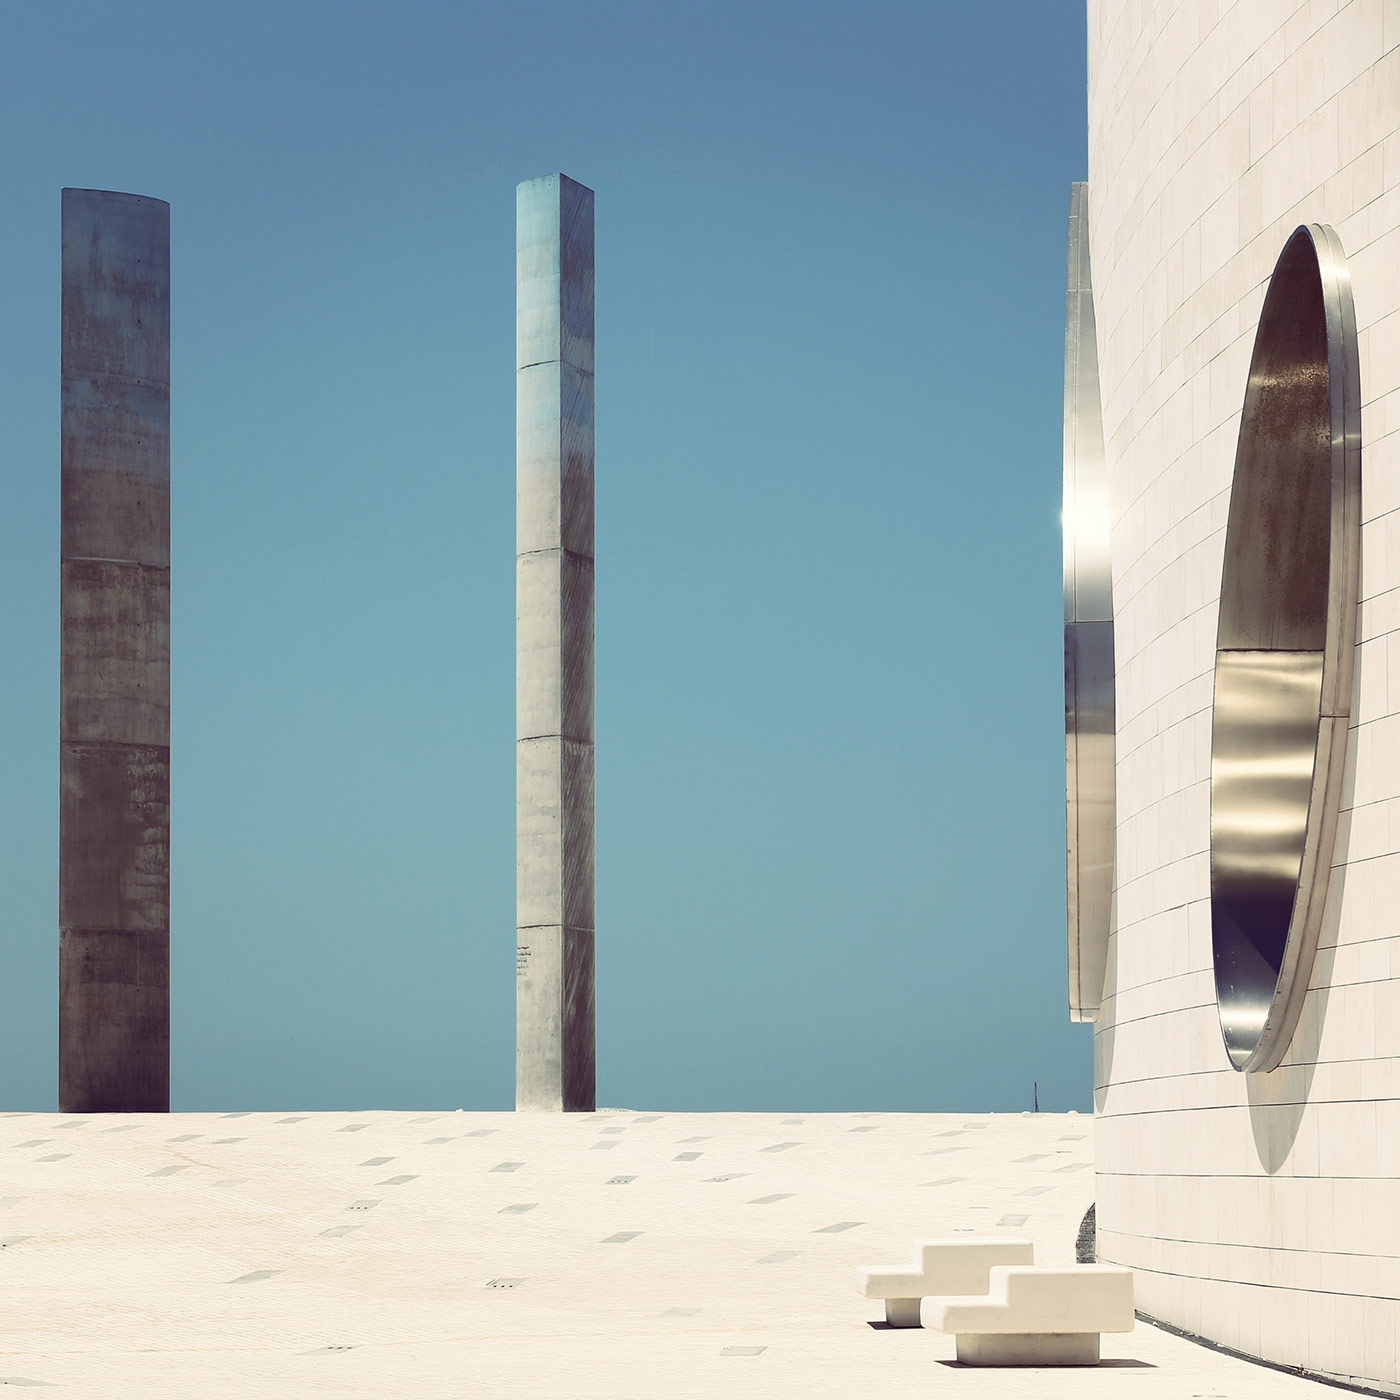 Champalimaud Center for the Unknown <br />Location: Lisbon, Portugal <br />Architect: Charles Correa Associates